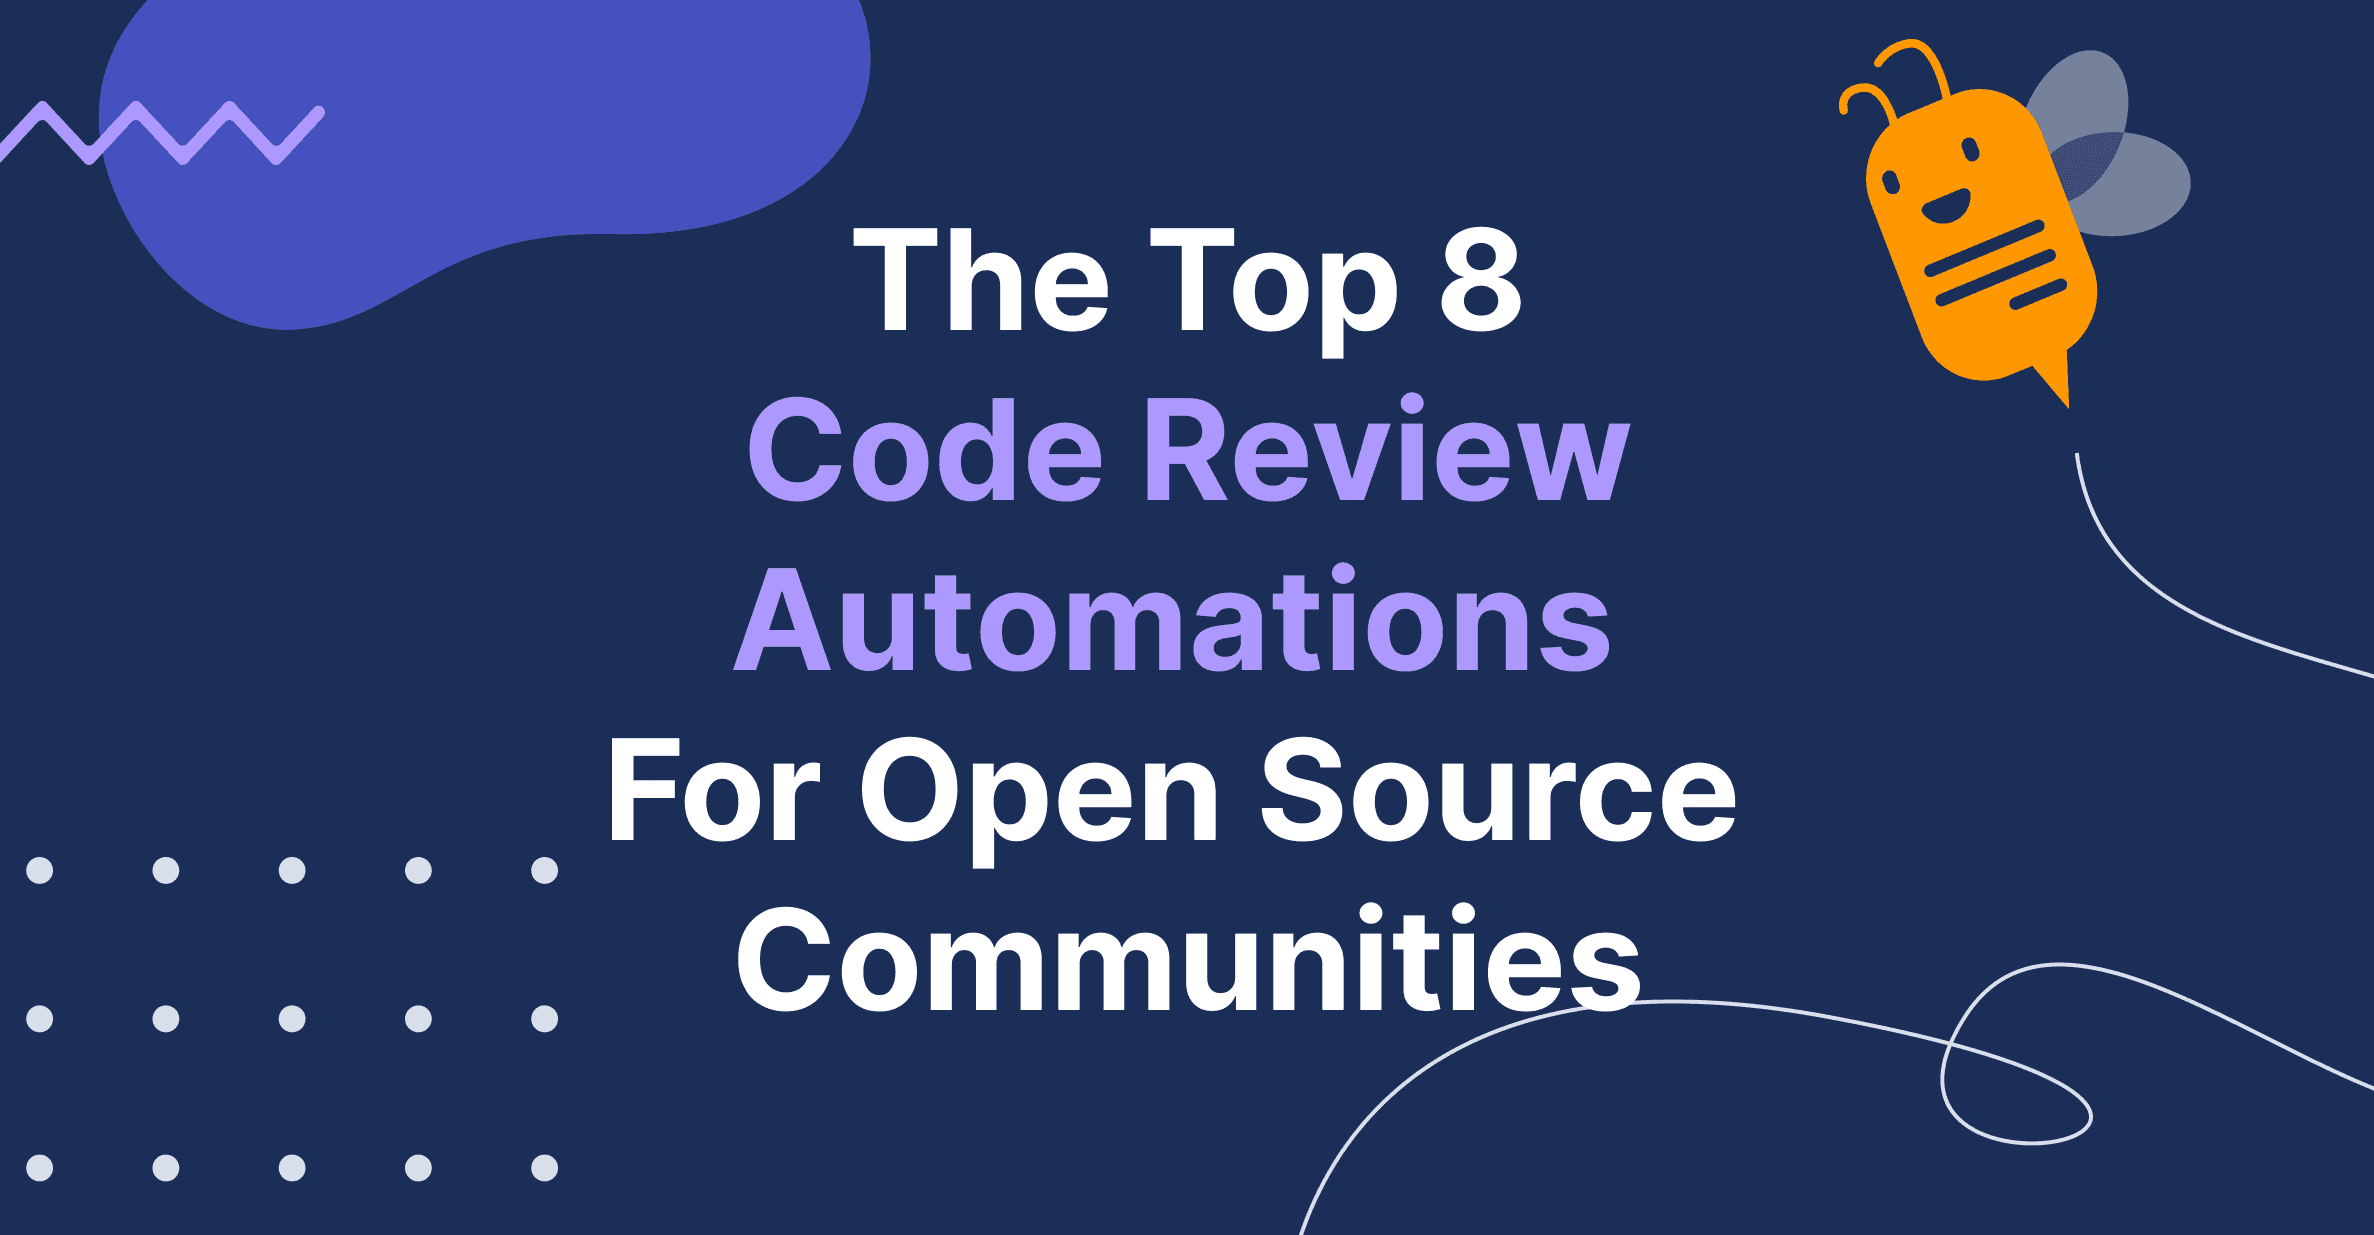 The Top 8 Code Review Automations for Open Source Communities